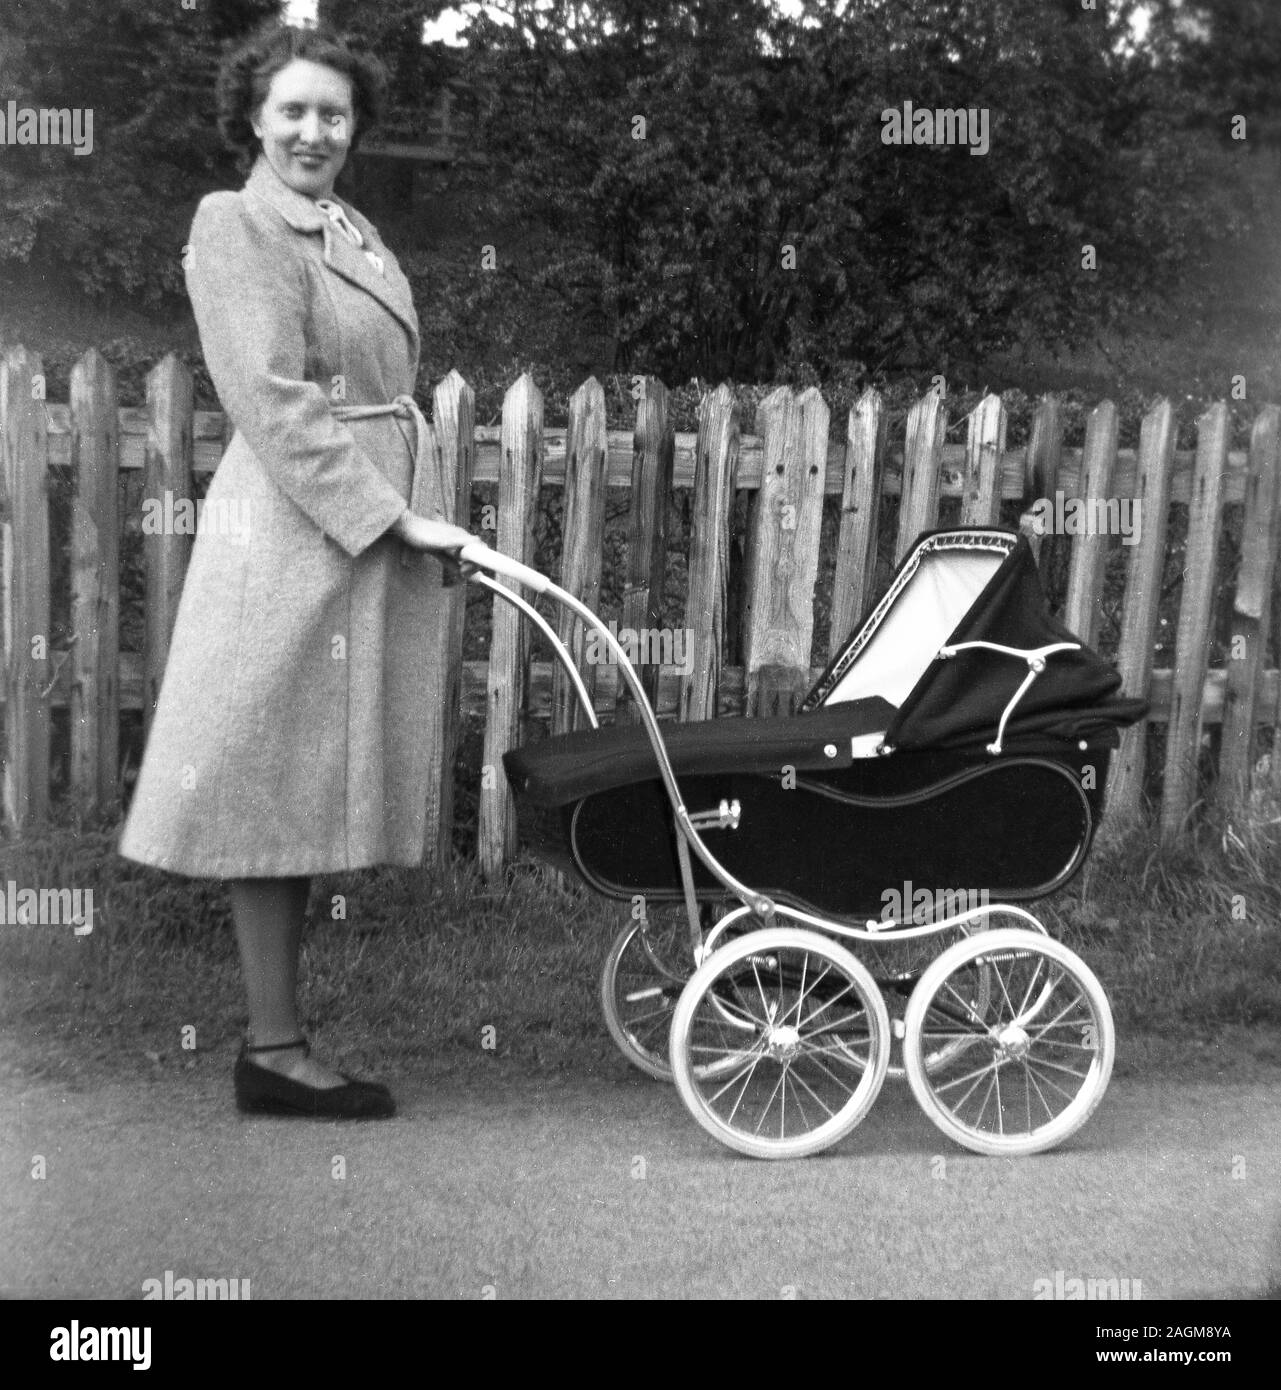 1950s, historical, a lady in a coat standing outside holding the handle of a traditional four-wheeled coach-built baby carriage or pram of the era, England, UK. Stock Photo